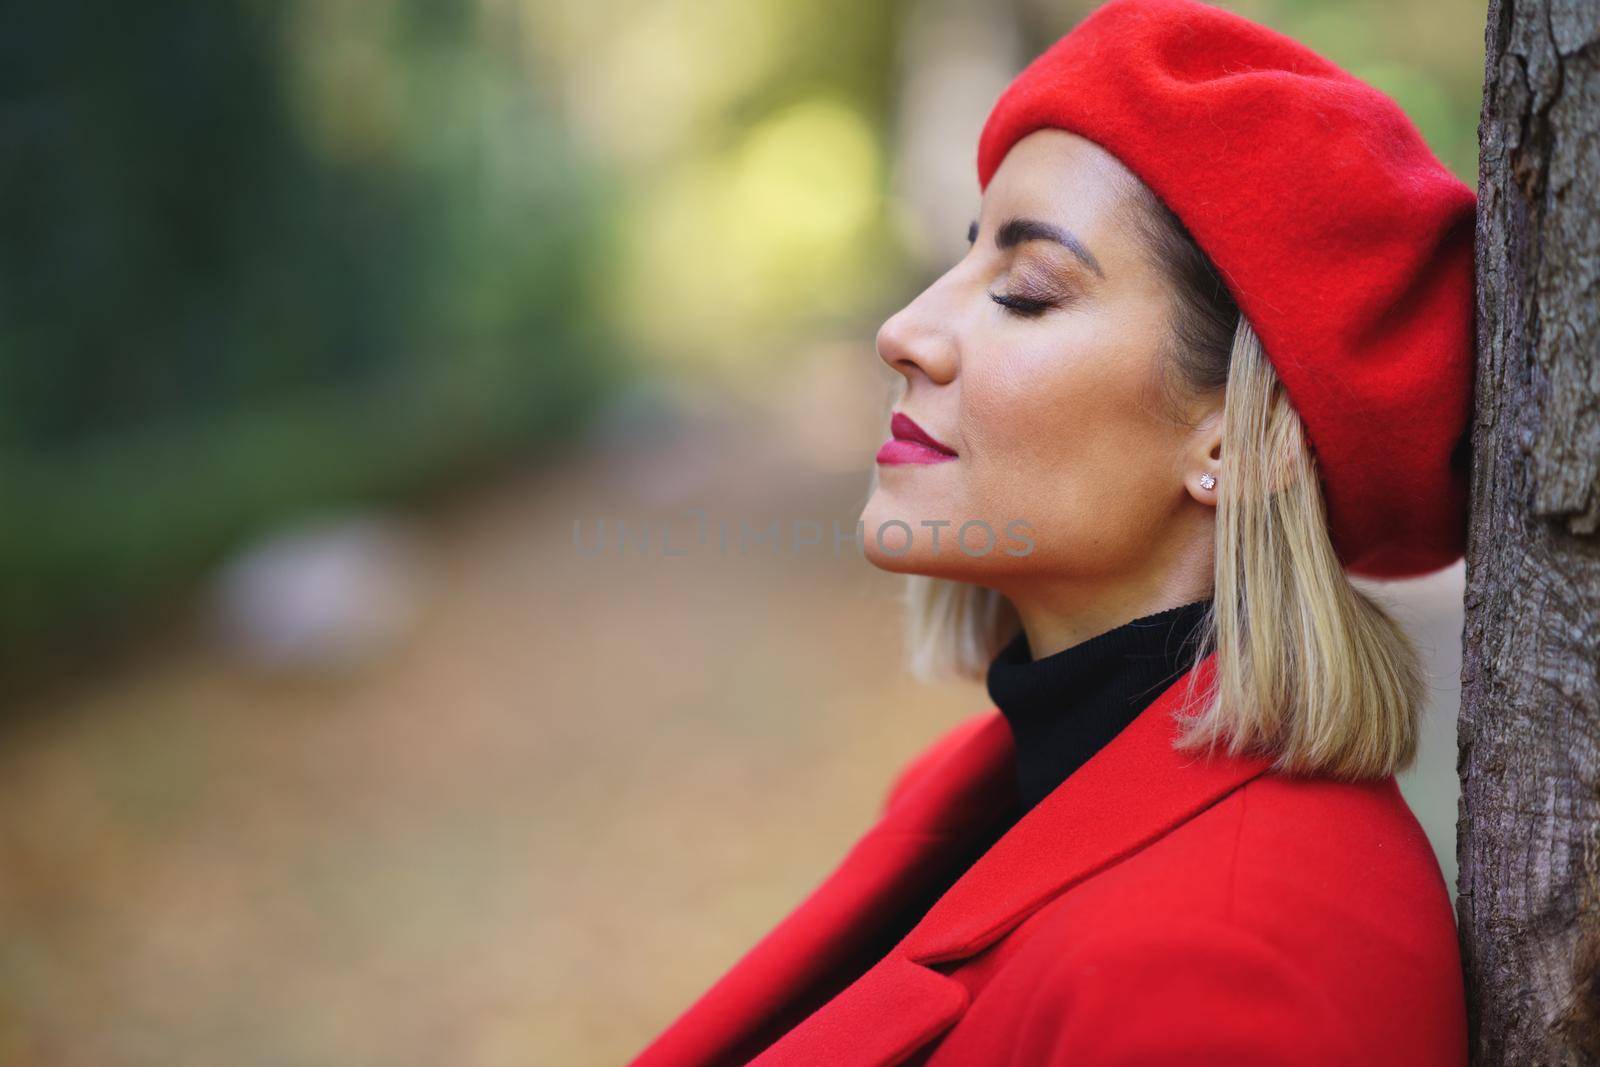 Close-up profile picture of a middle-aged woman leaning against a tree trunk with her eyes closed. Female in beret and red coat taking time to relax.